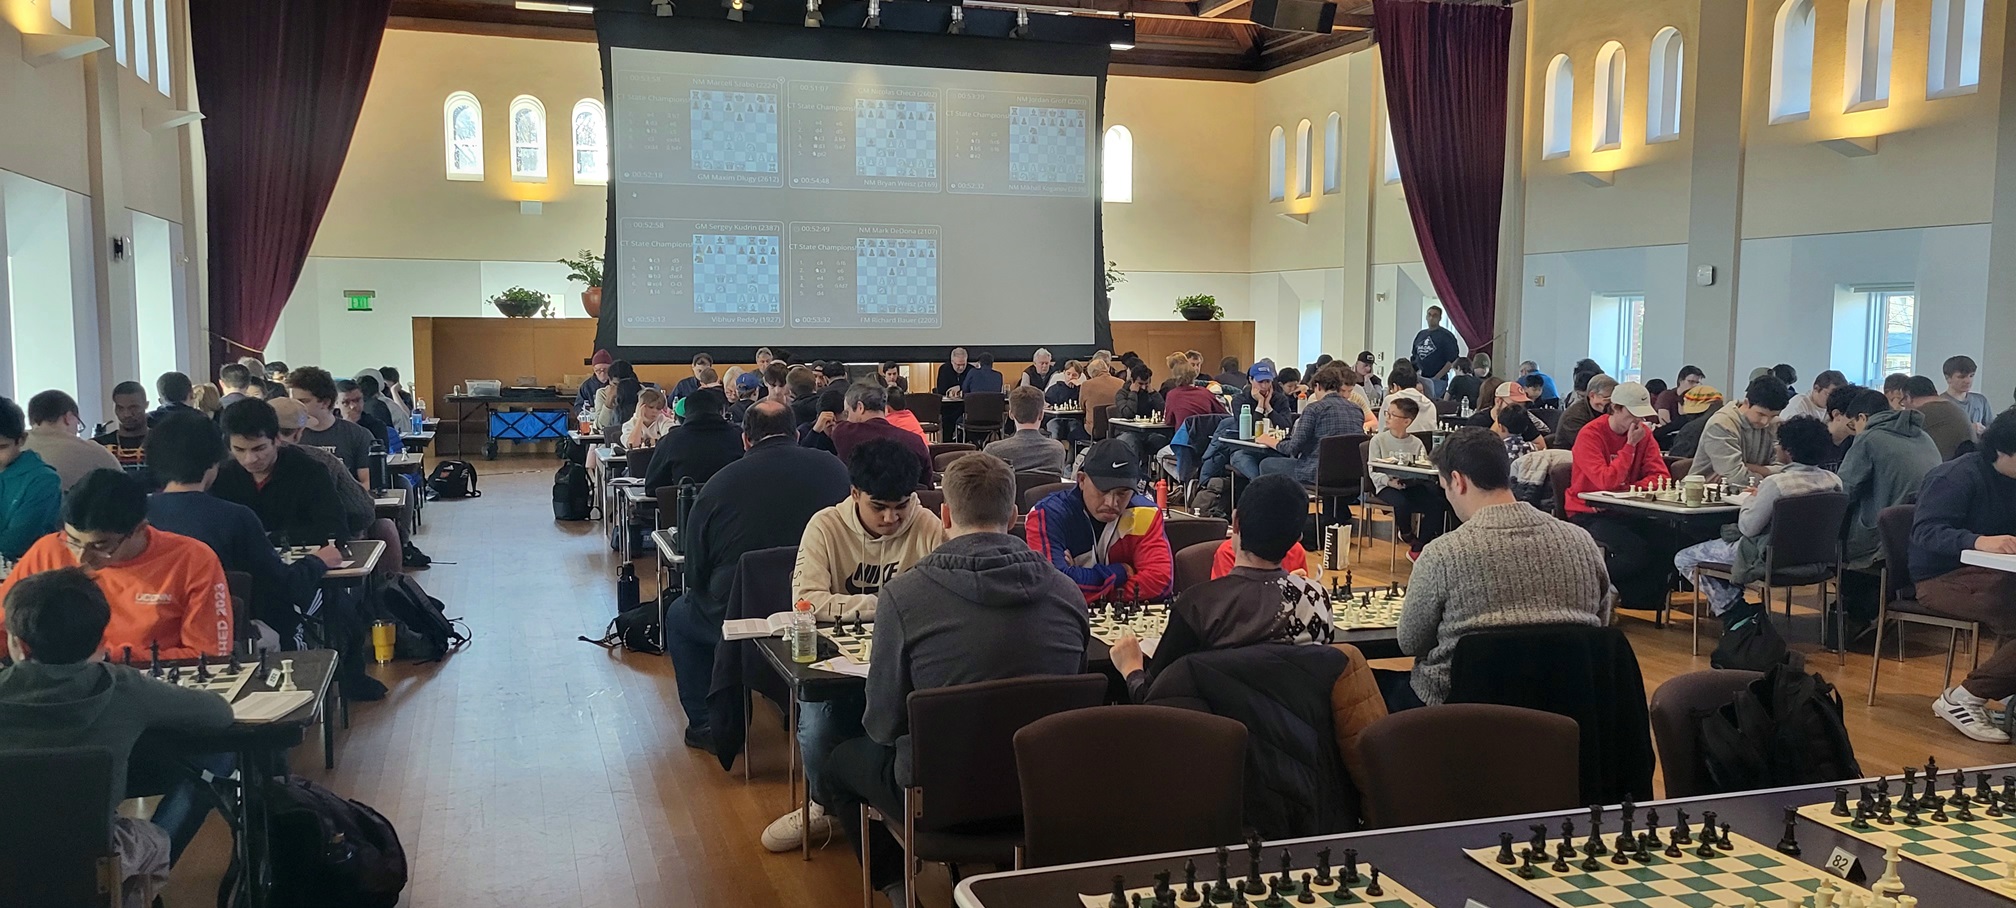 Chess: national solving championship 2023 open for entries from